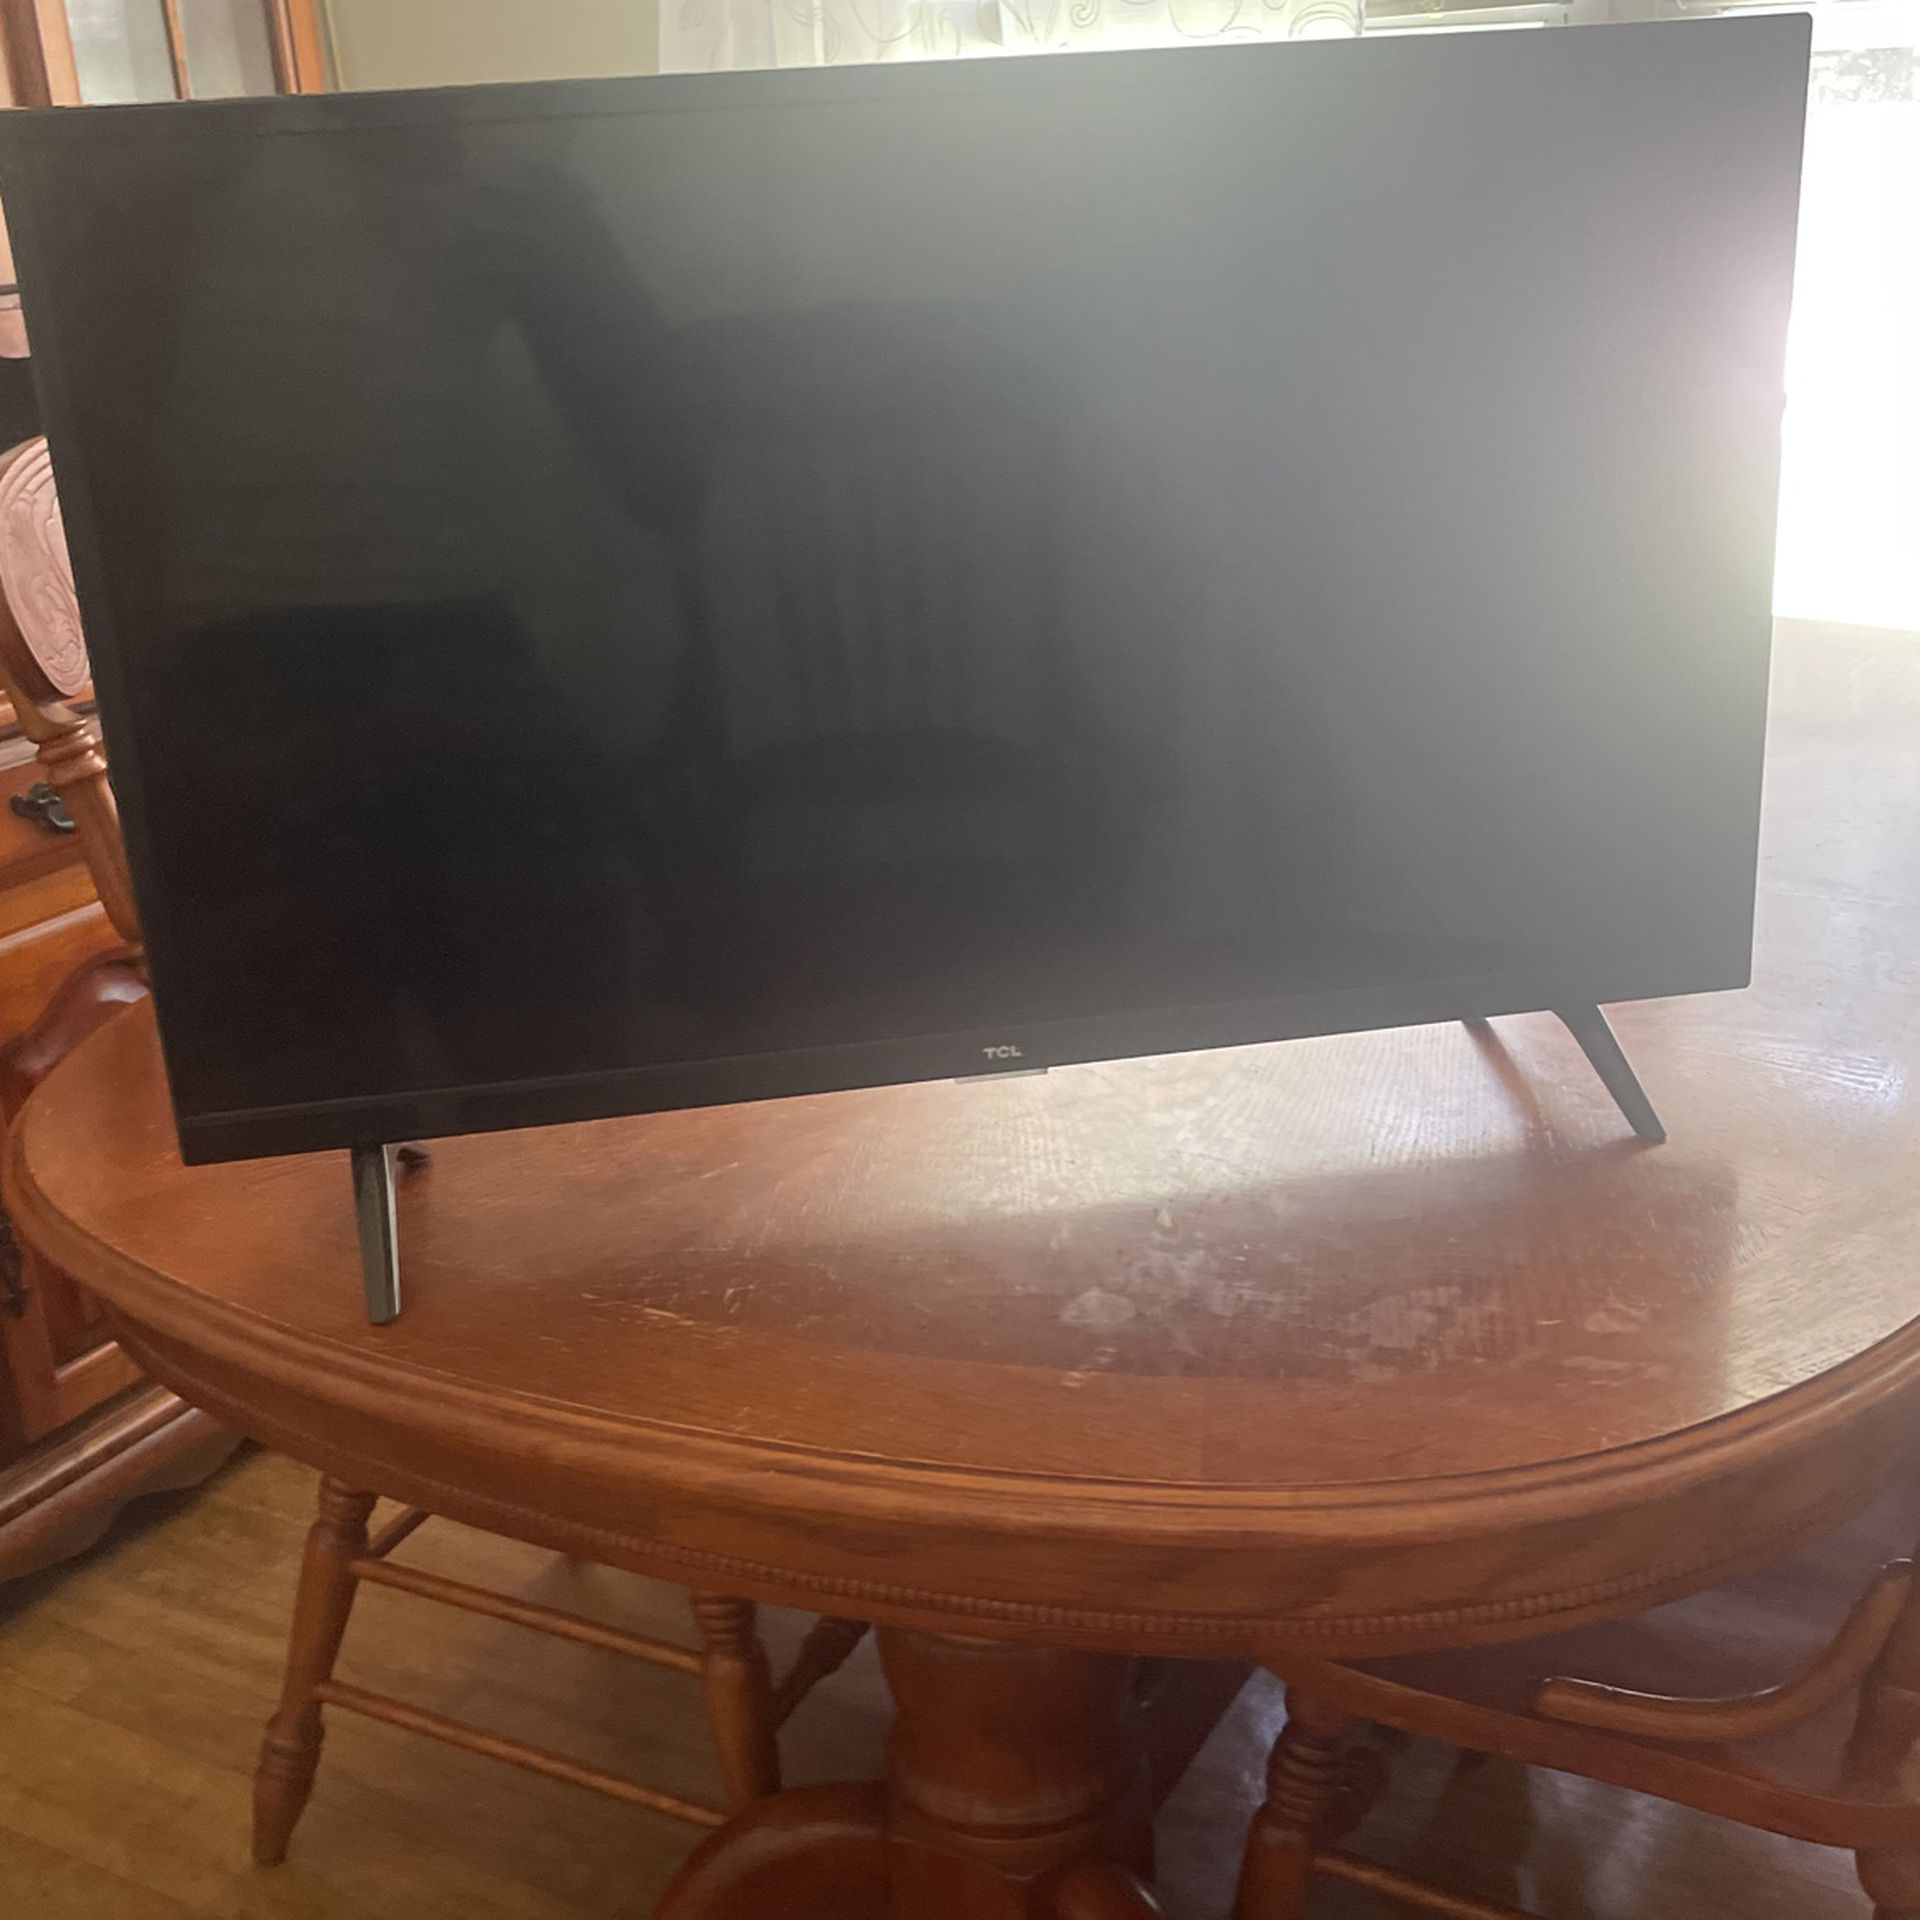 32 In TCL Smart Tv